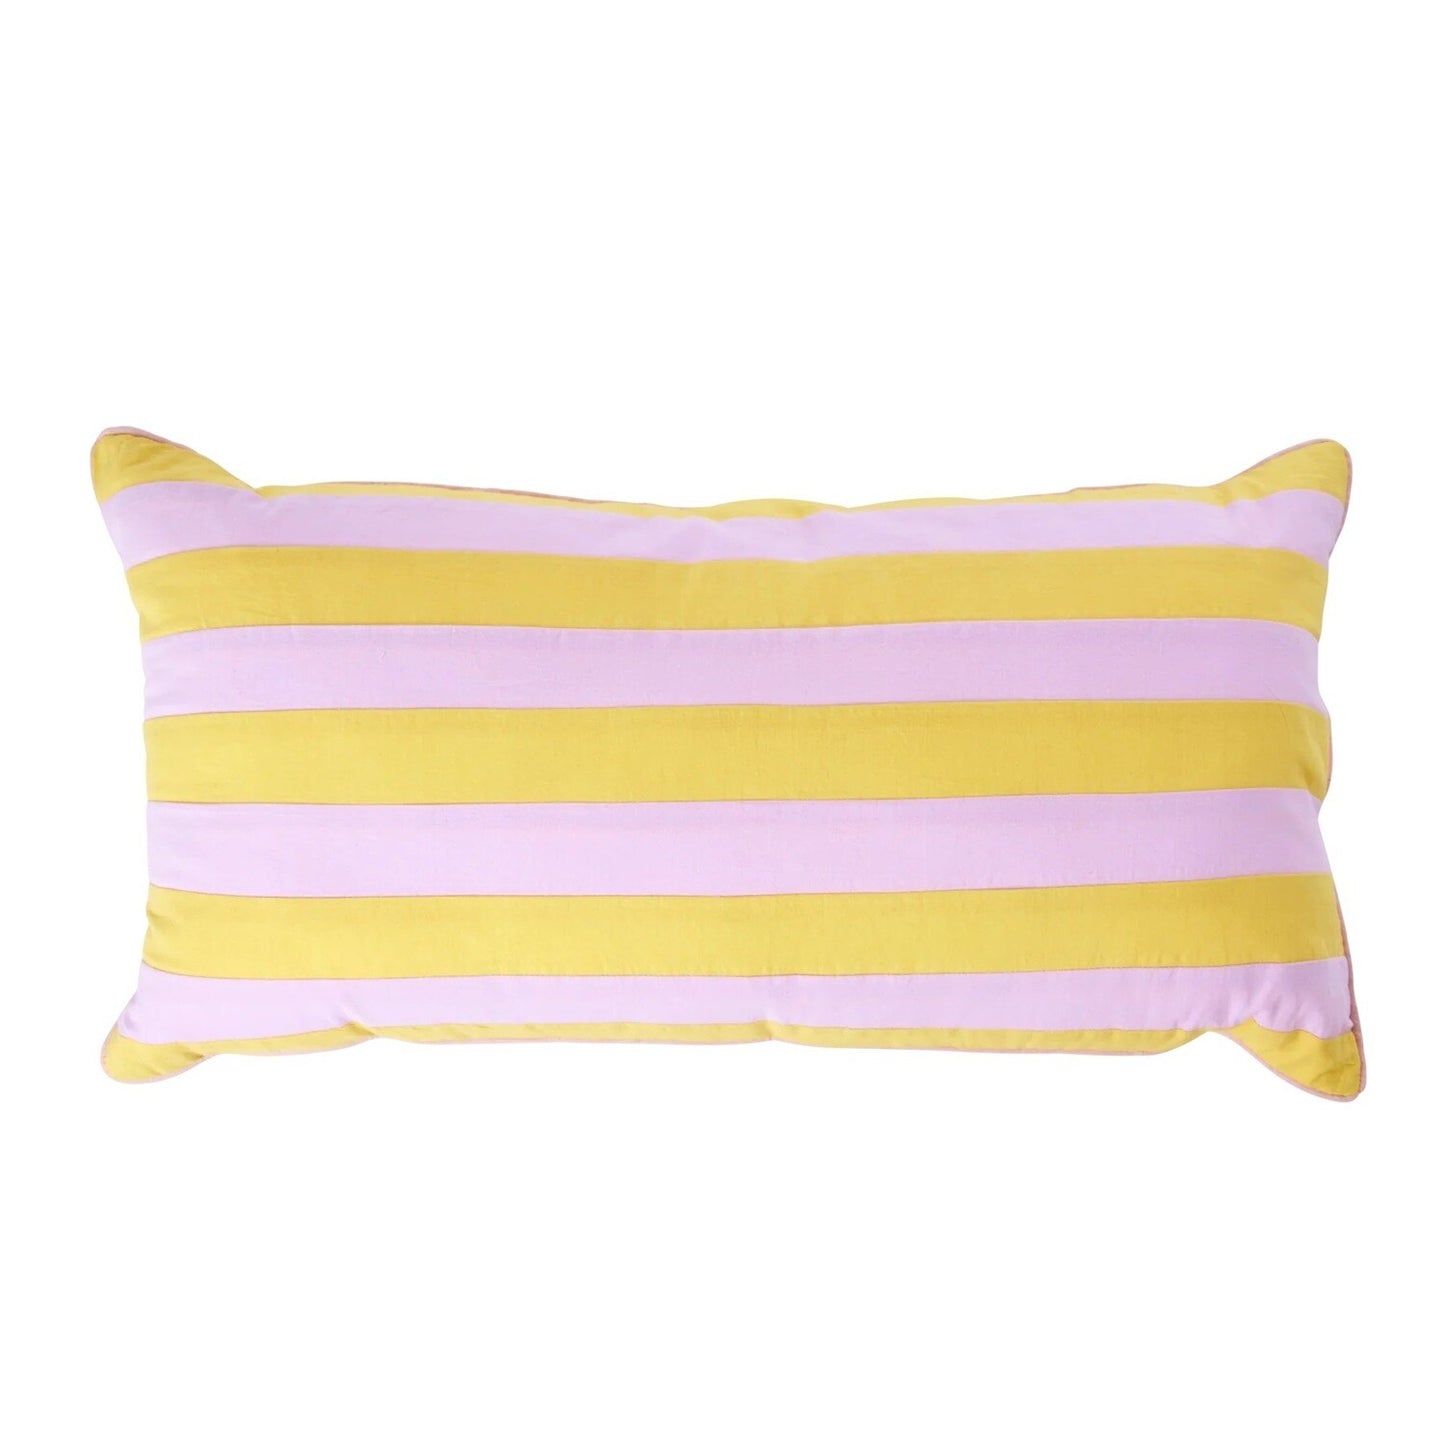 Coussin rayé rose et jaune  - RICE by RICE